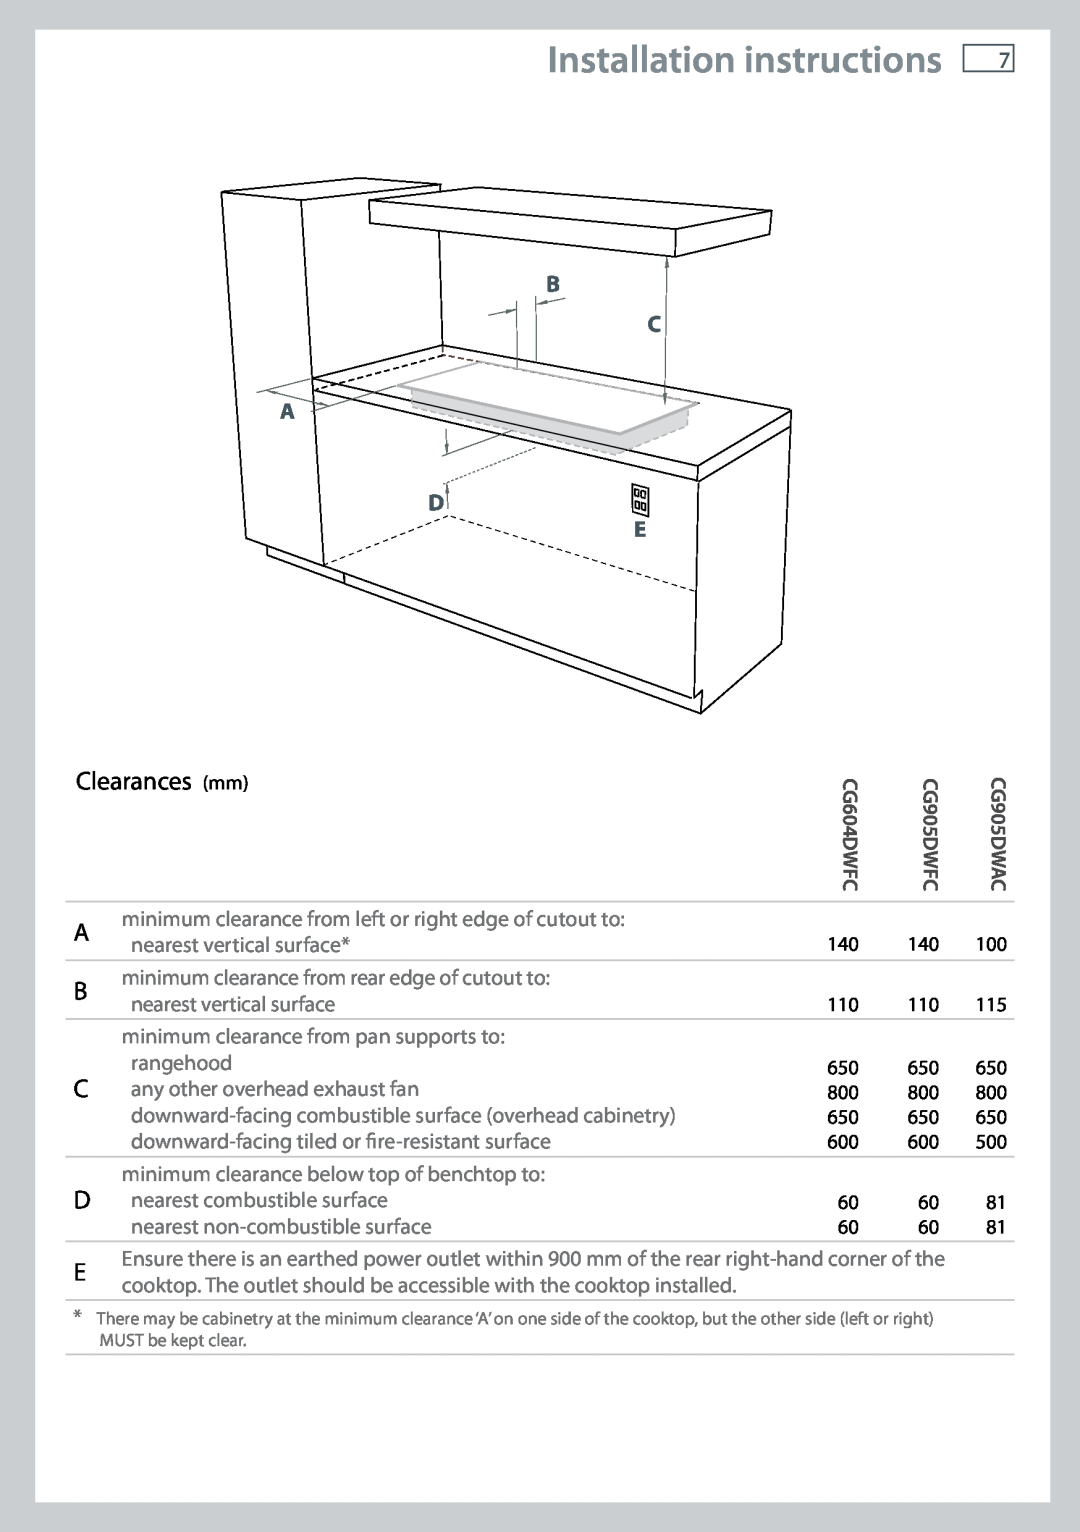 Fisher & Paykel installation instructions Installation instructions, Clearances mm, CG905DWAC 